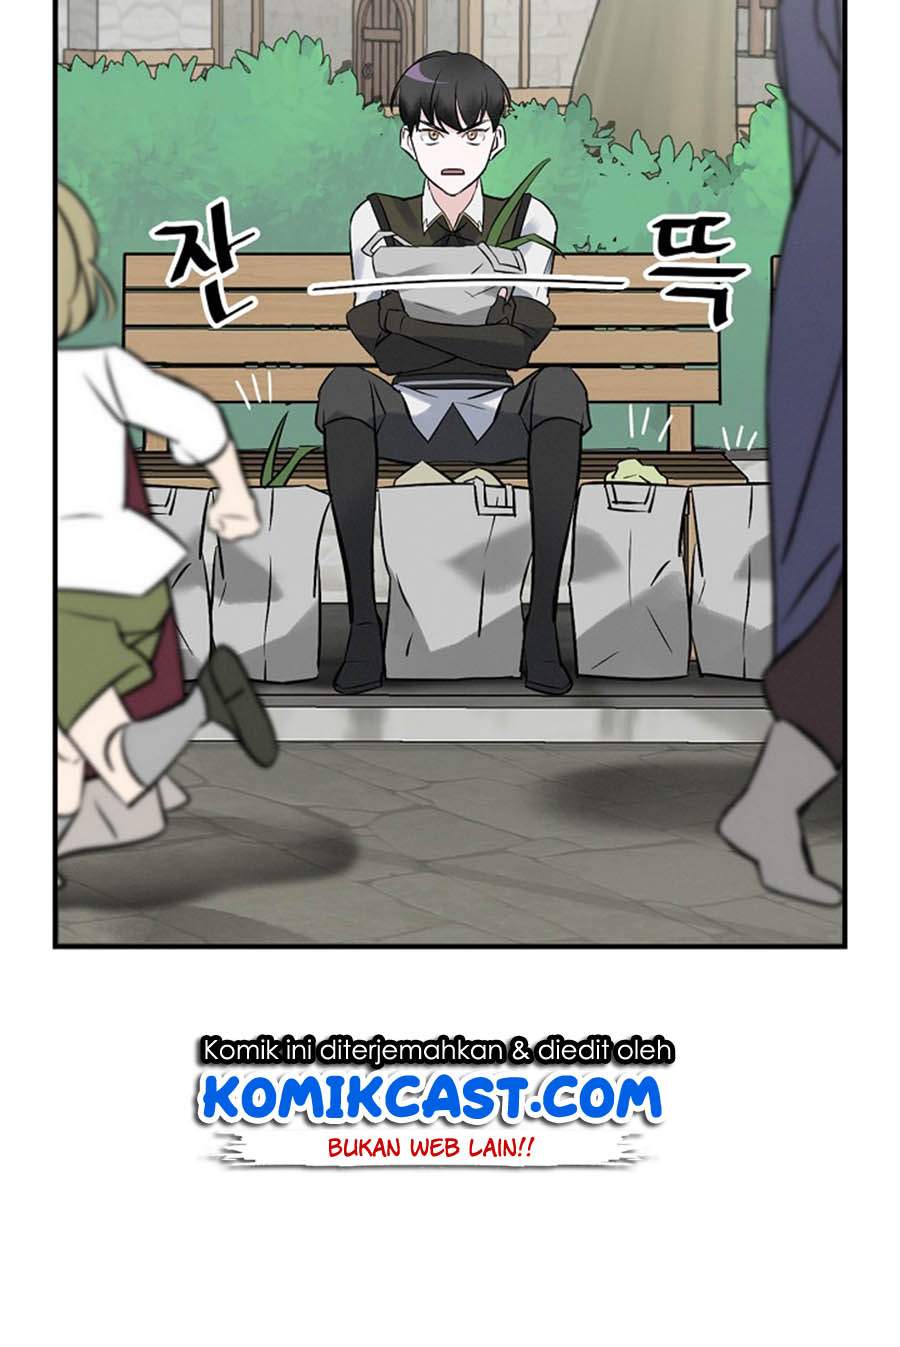 Leveling Up, By Only Eating! (Gourmet Gaming) Chapter 13 - 547